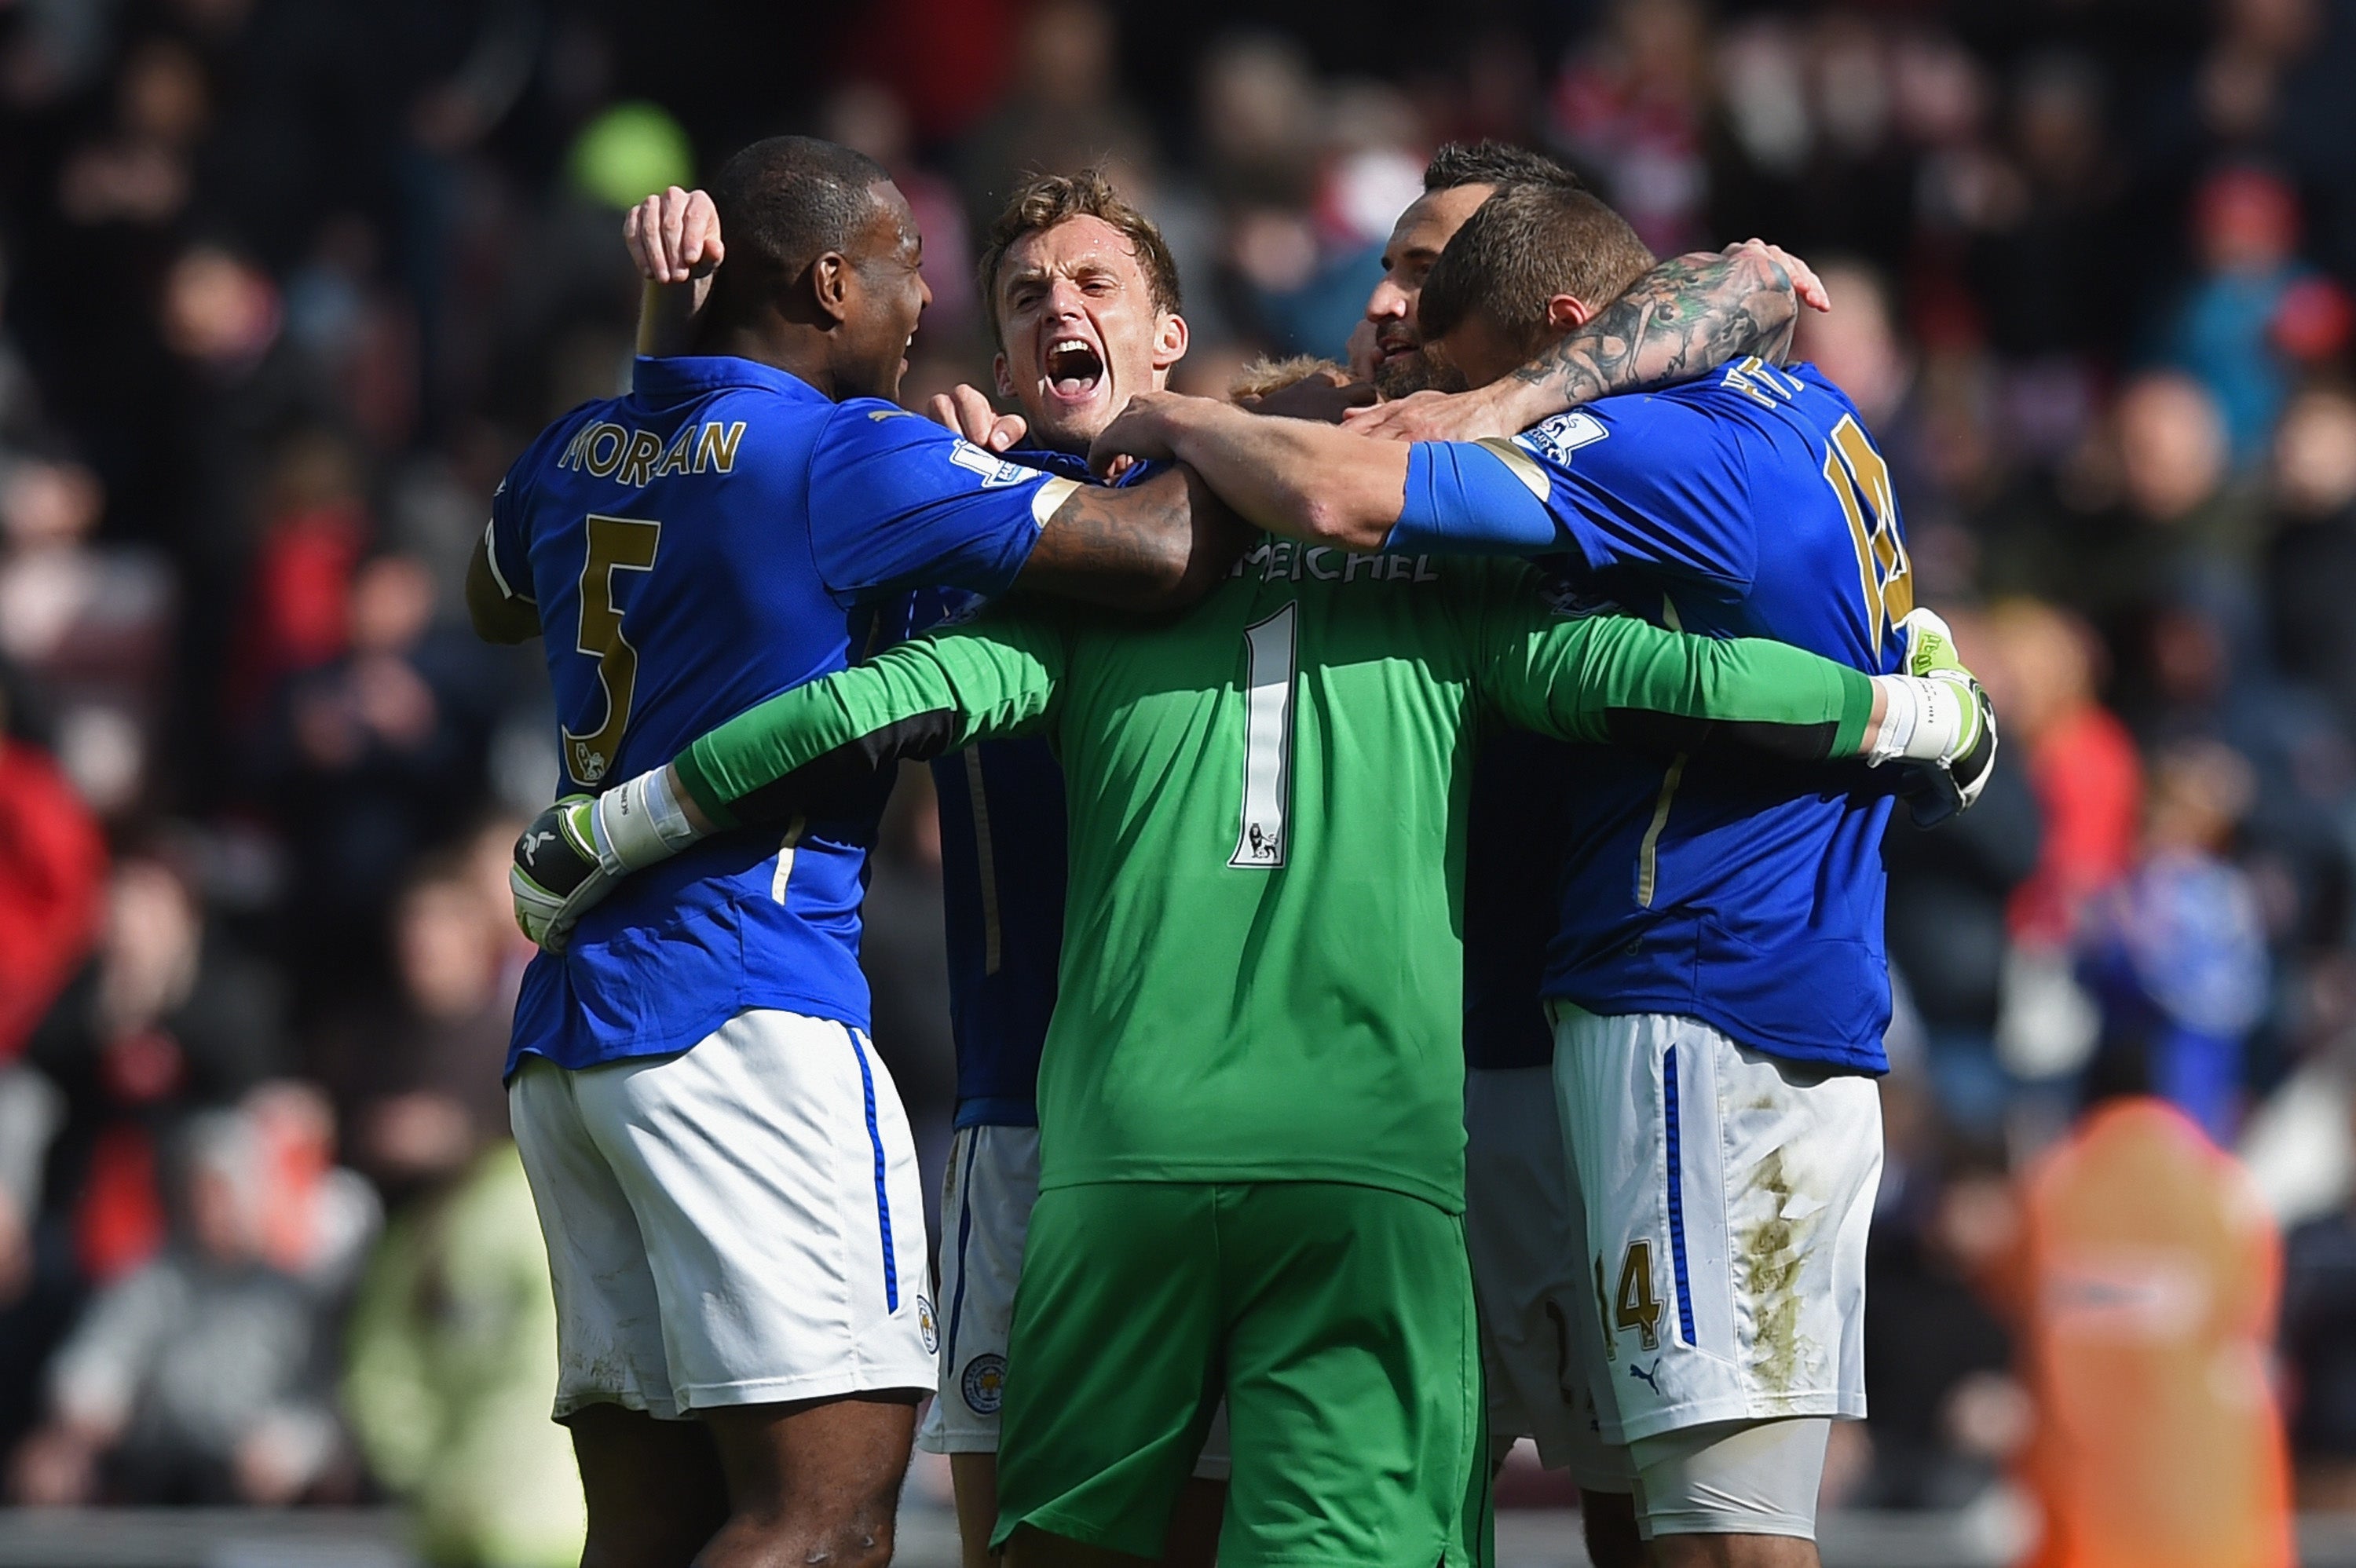 Leicester sealed their Premier League safety with a draw at Sunderland